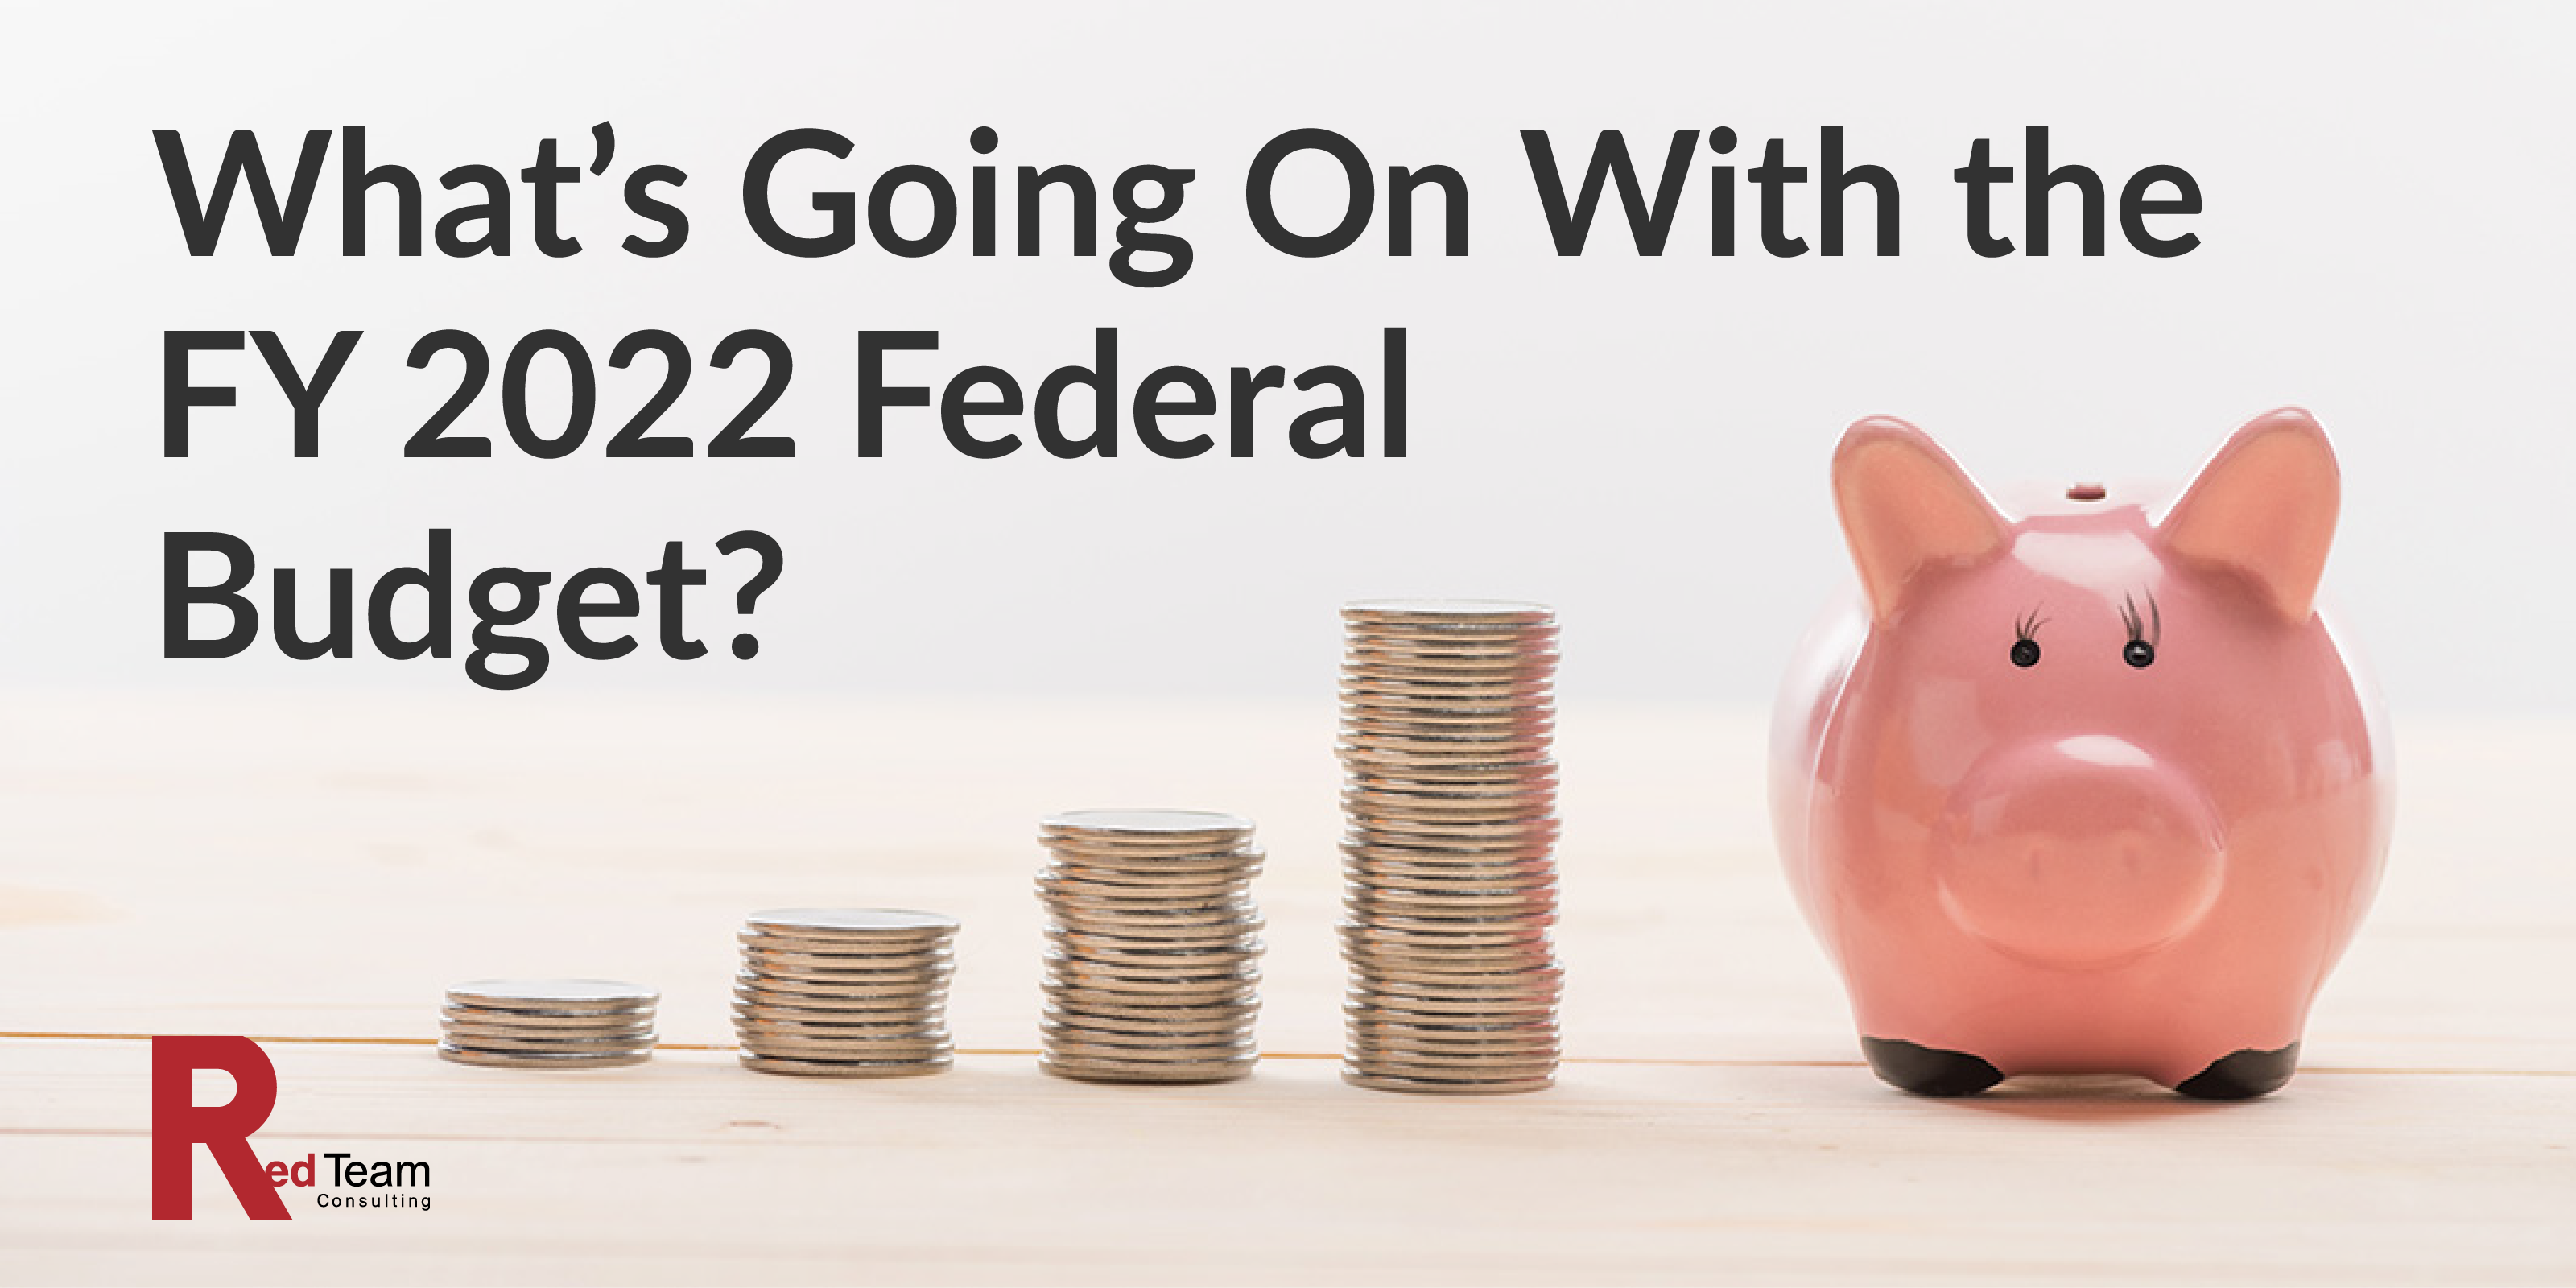 What’s going on with the FY 2022 Federal Budget? 081021